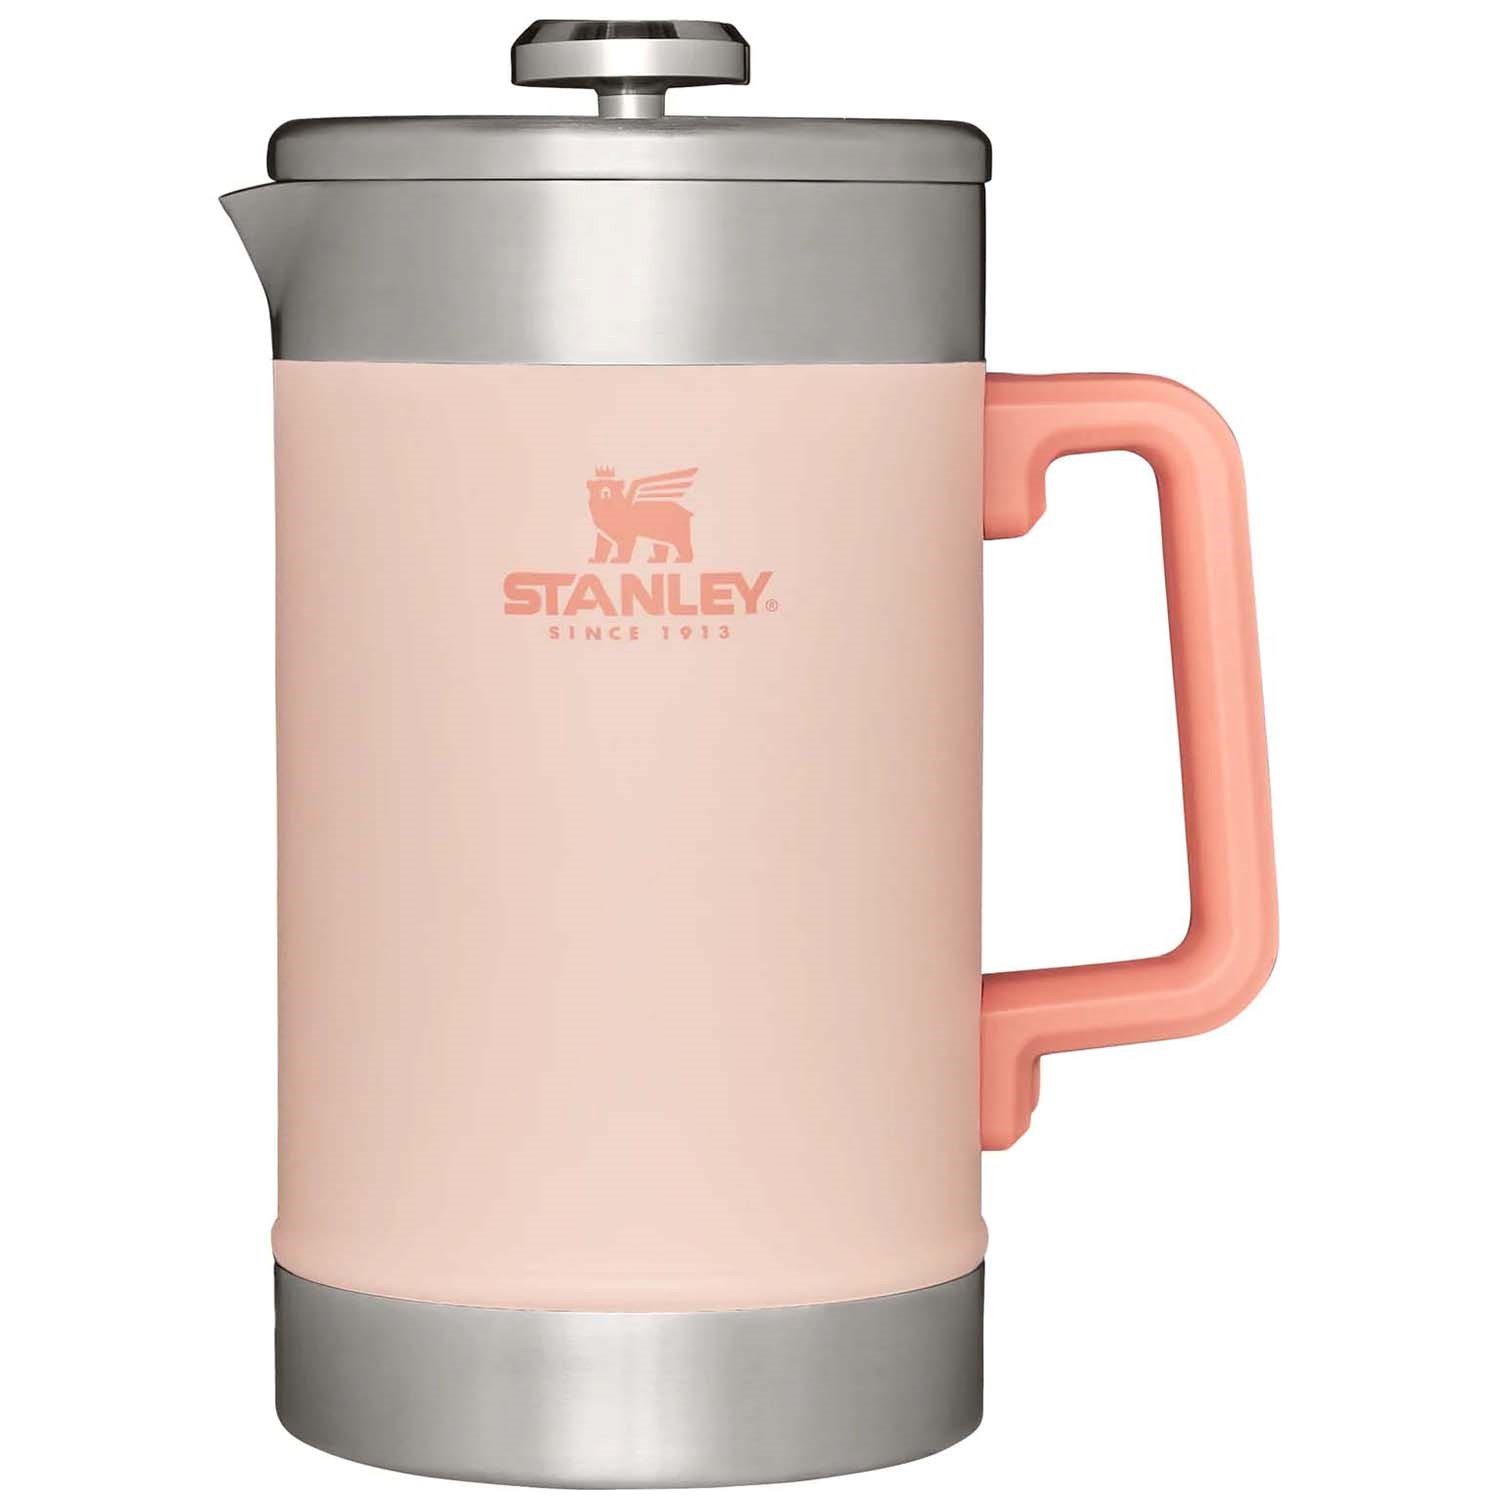 https://images.evo.com/imgp/zoom/233773/962088/stanley-the-stay-hot-french-press-.jpg